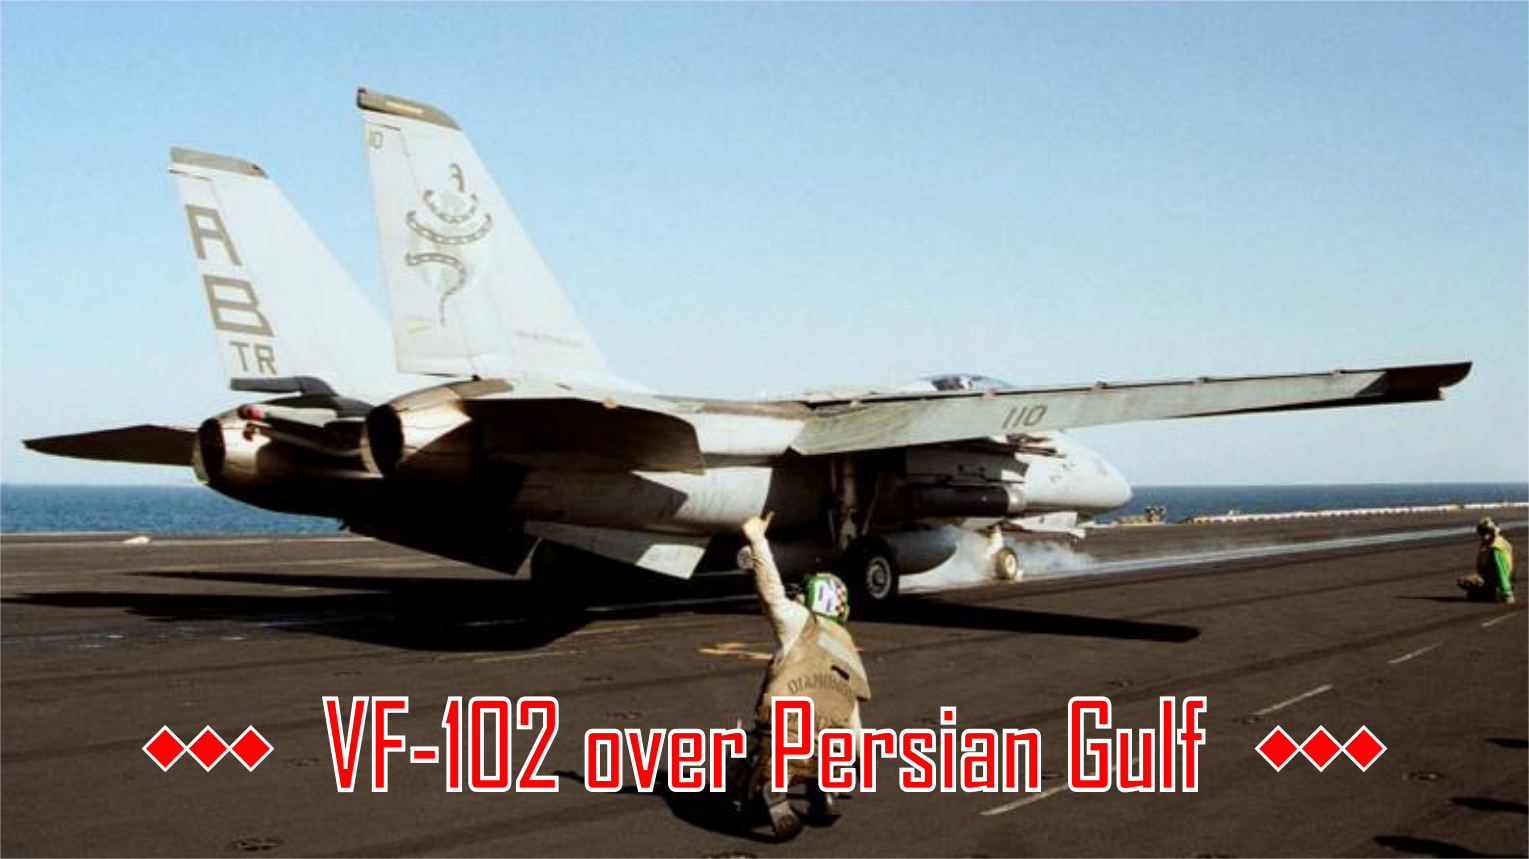 VF-102 over Persian Gulf (Mod for Tomcat over PG by CEF)